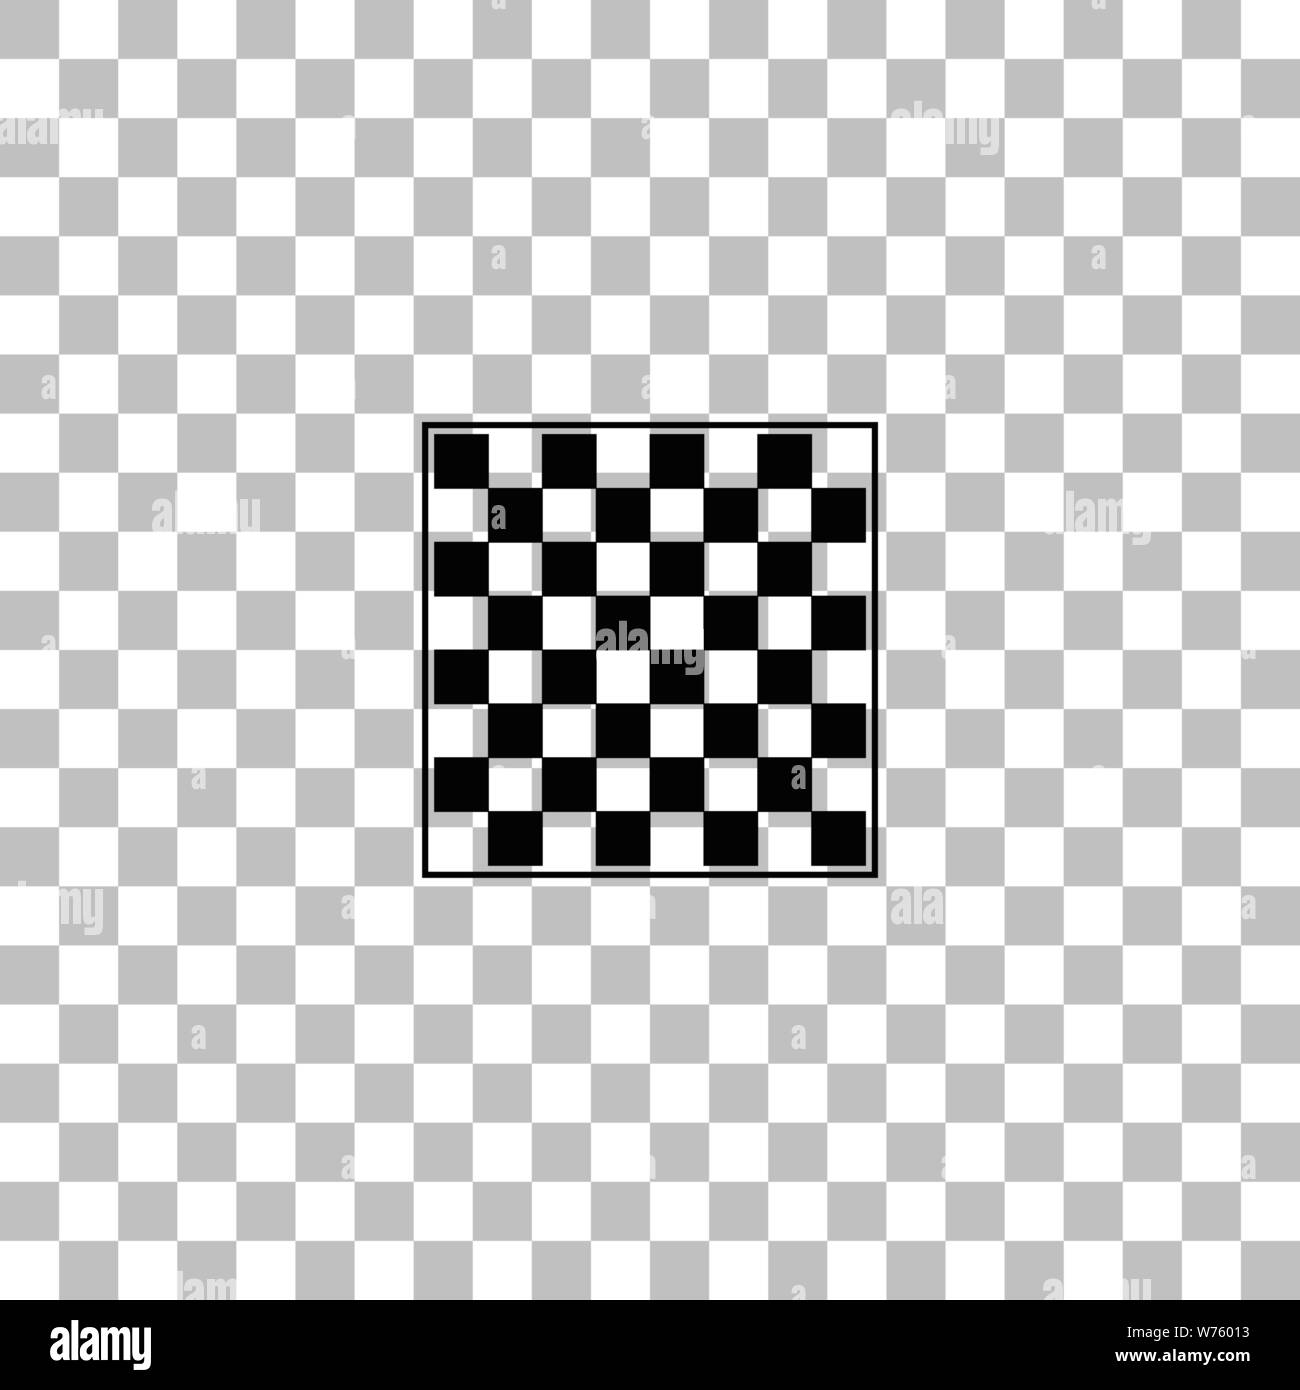 Chess board icon on transparent background Vector Image